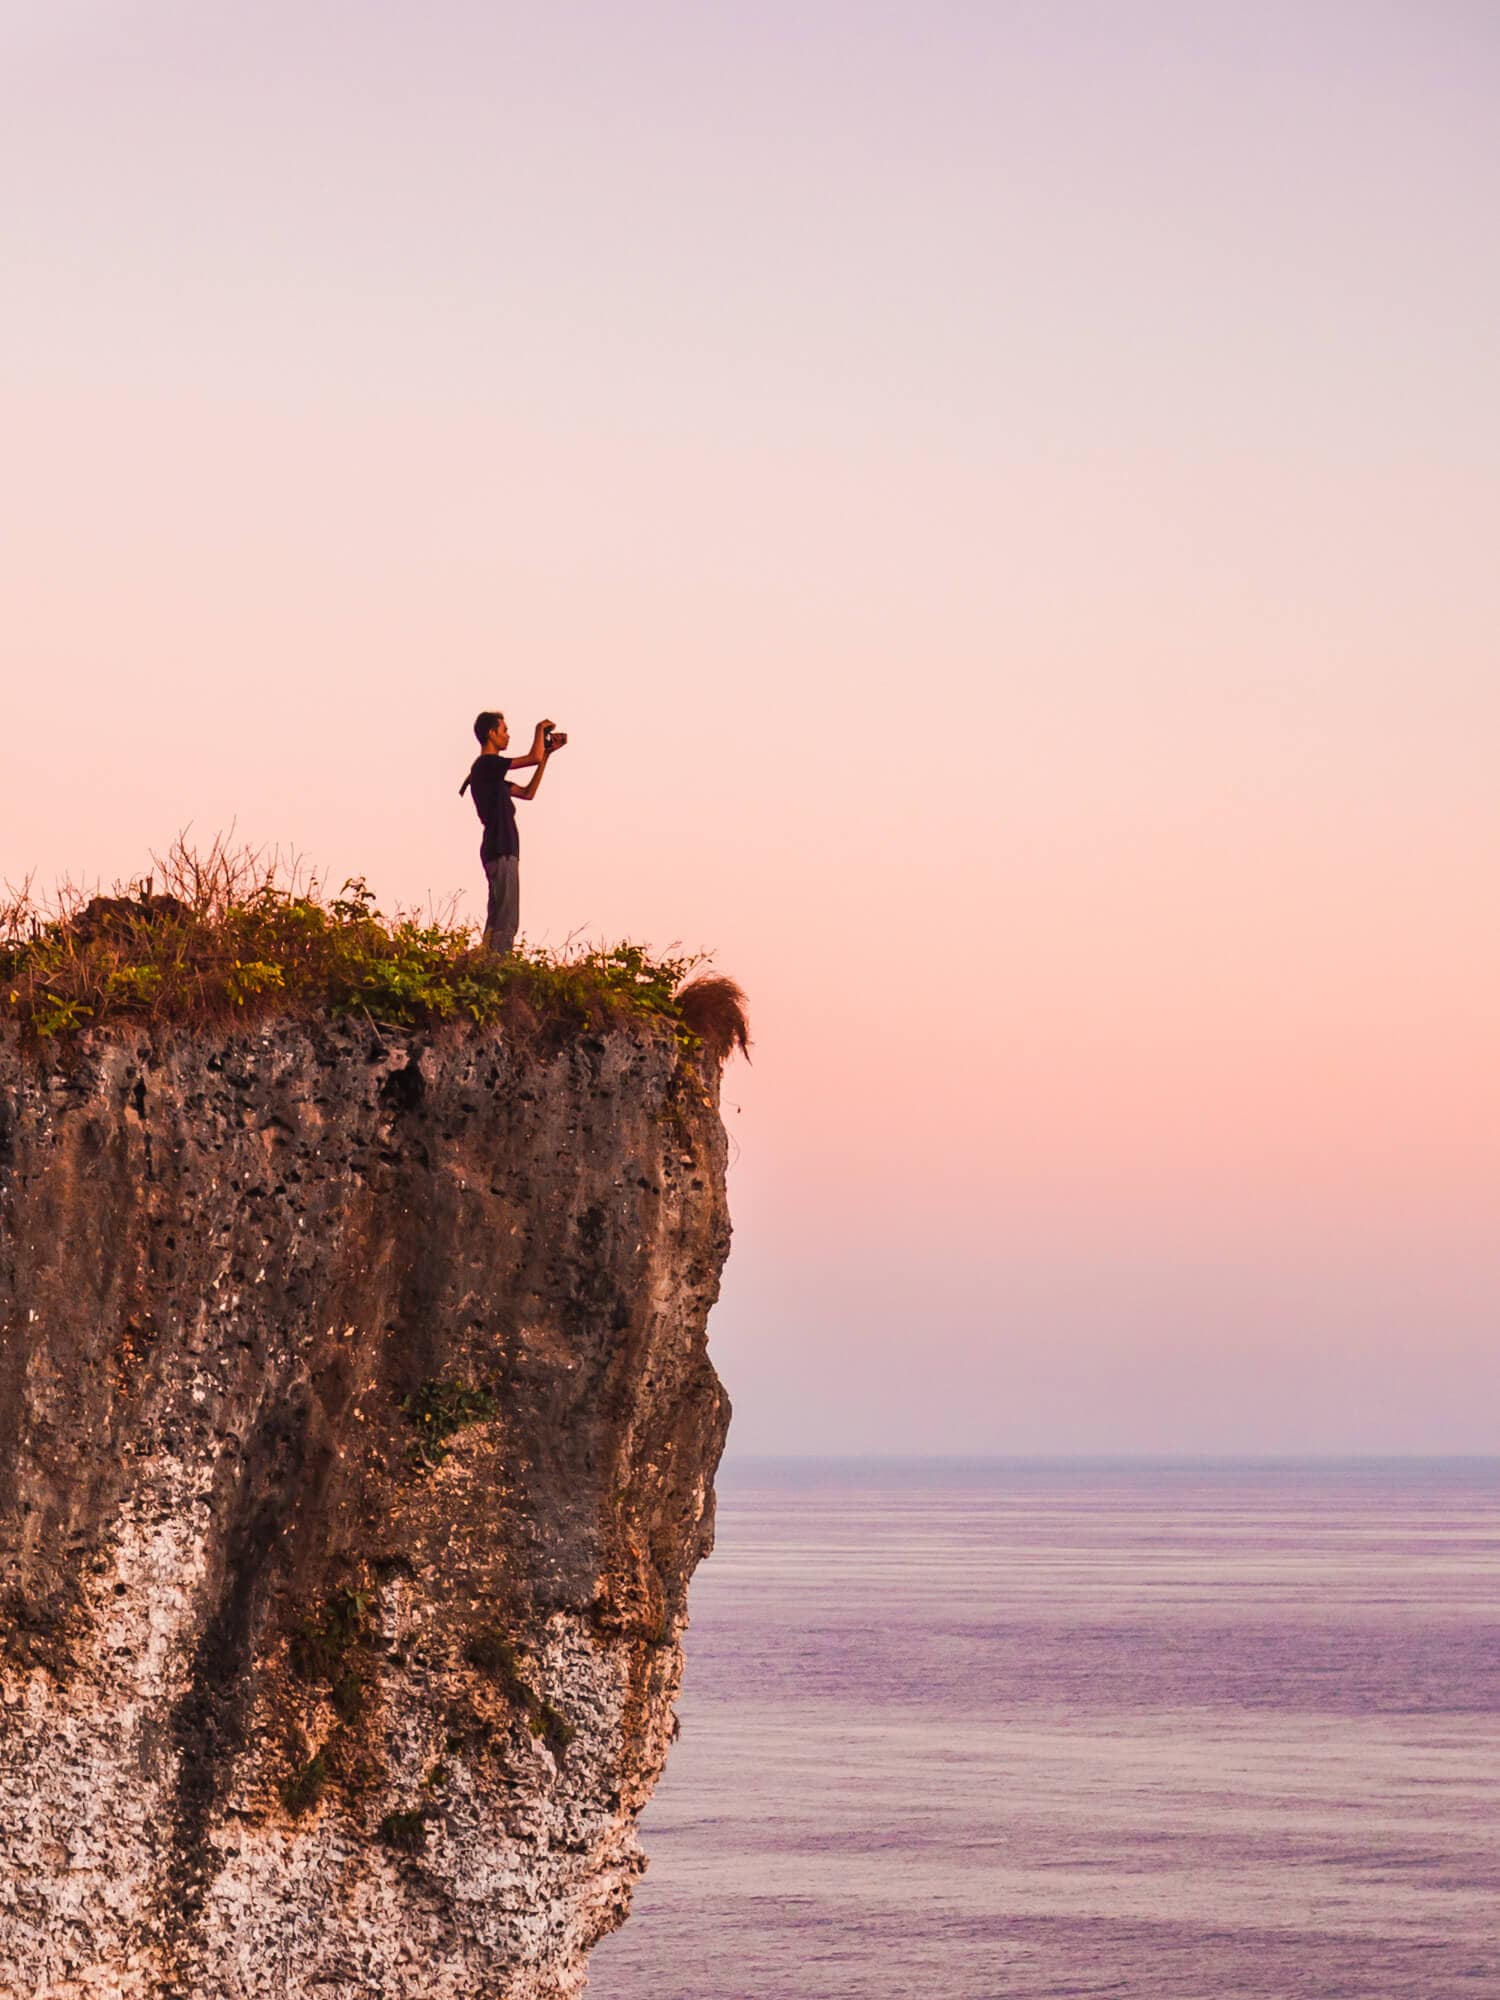 The popular photo spot at Karang Boma Cliff set against a pink and orange sunset